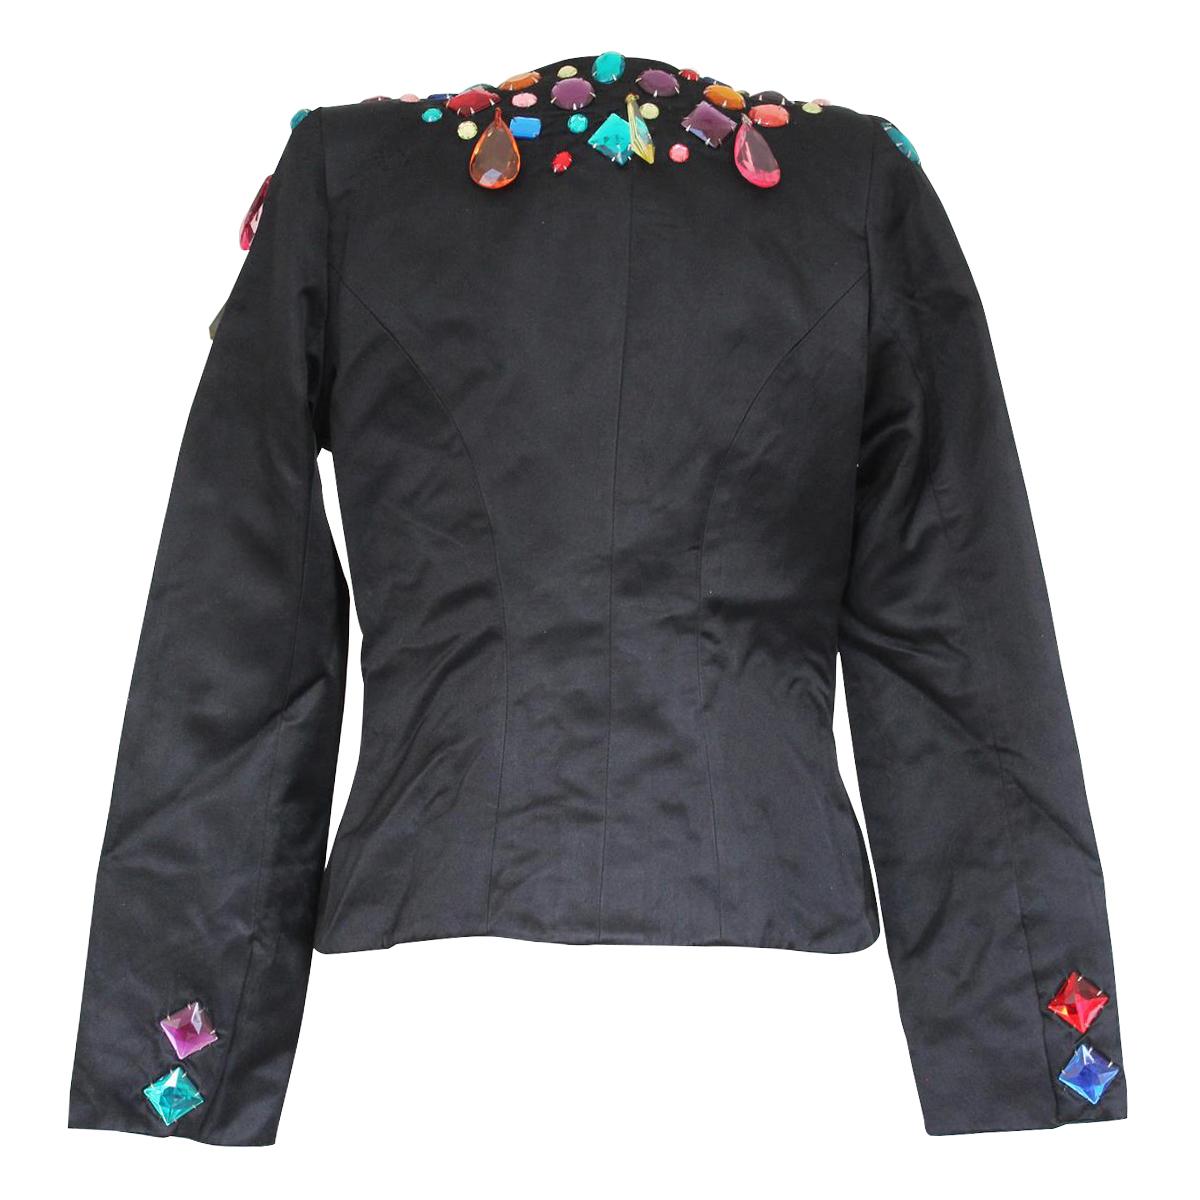 Crazy and fantastic jacket by Victor Costa
Acetate (65%) Silk (35%)
Black color
Multicolor crystals drops on the front part
Button closure
Length shoulder/hem cm 53 (20.8 inches)
Shoulder length cm 31 (12.2 inches)
Worldwide express shipping